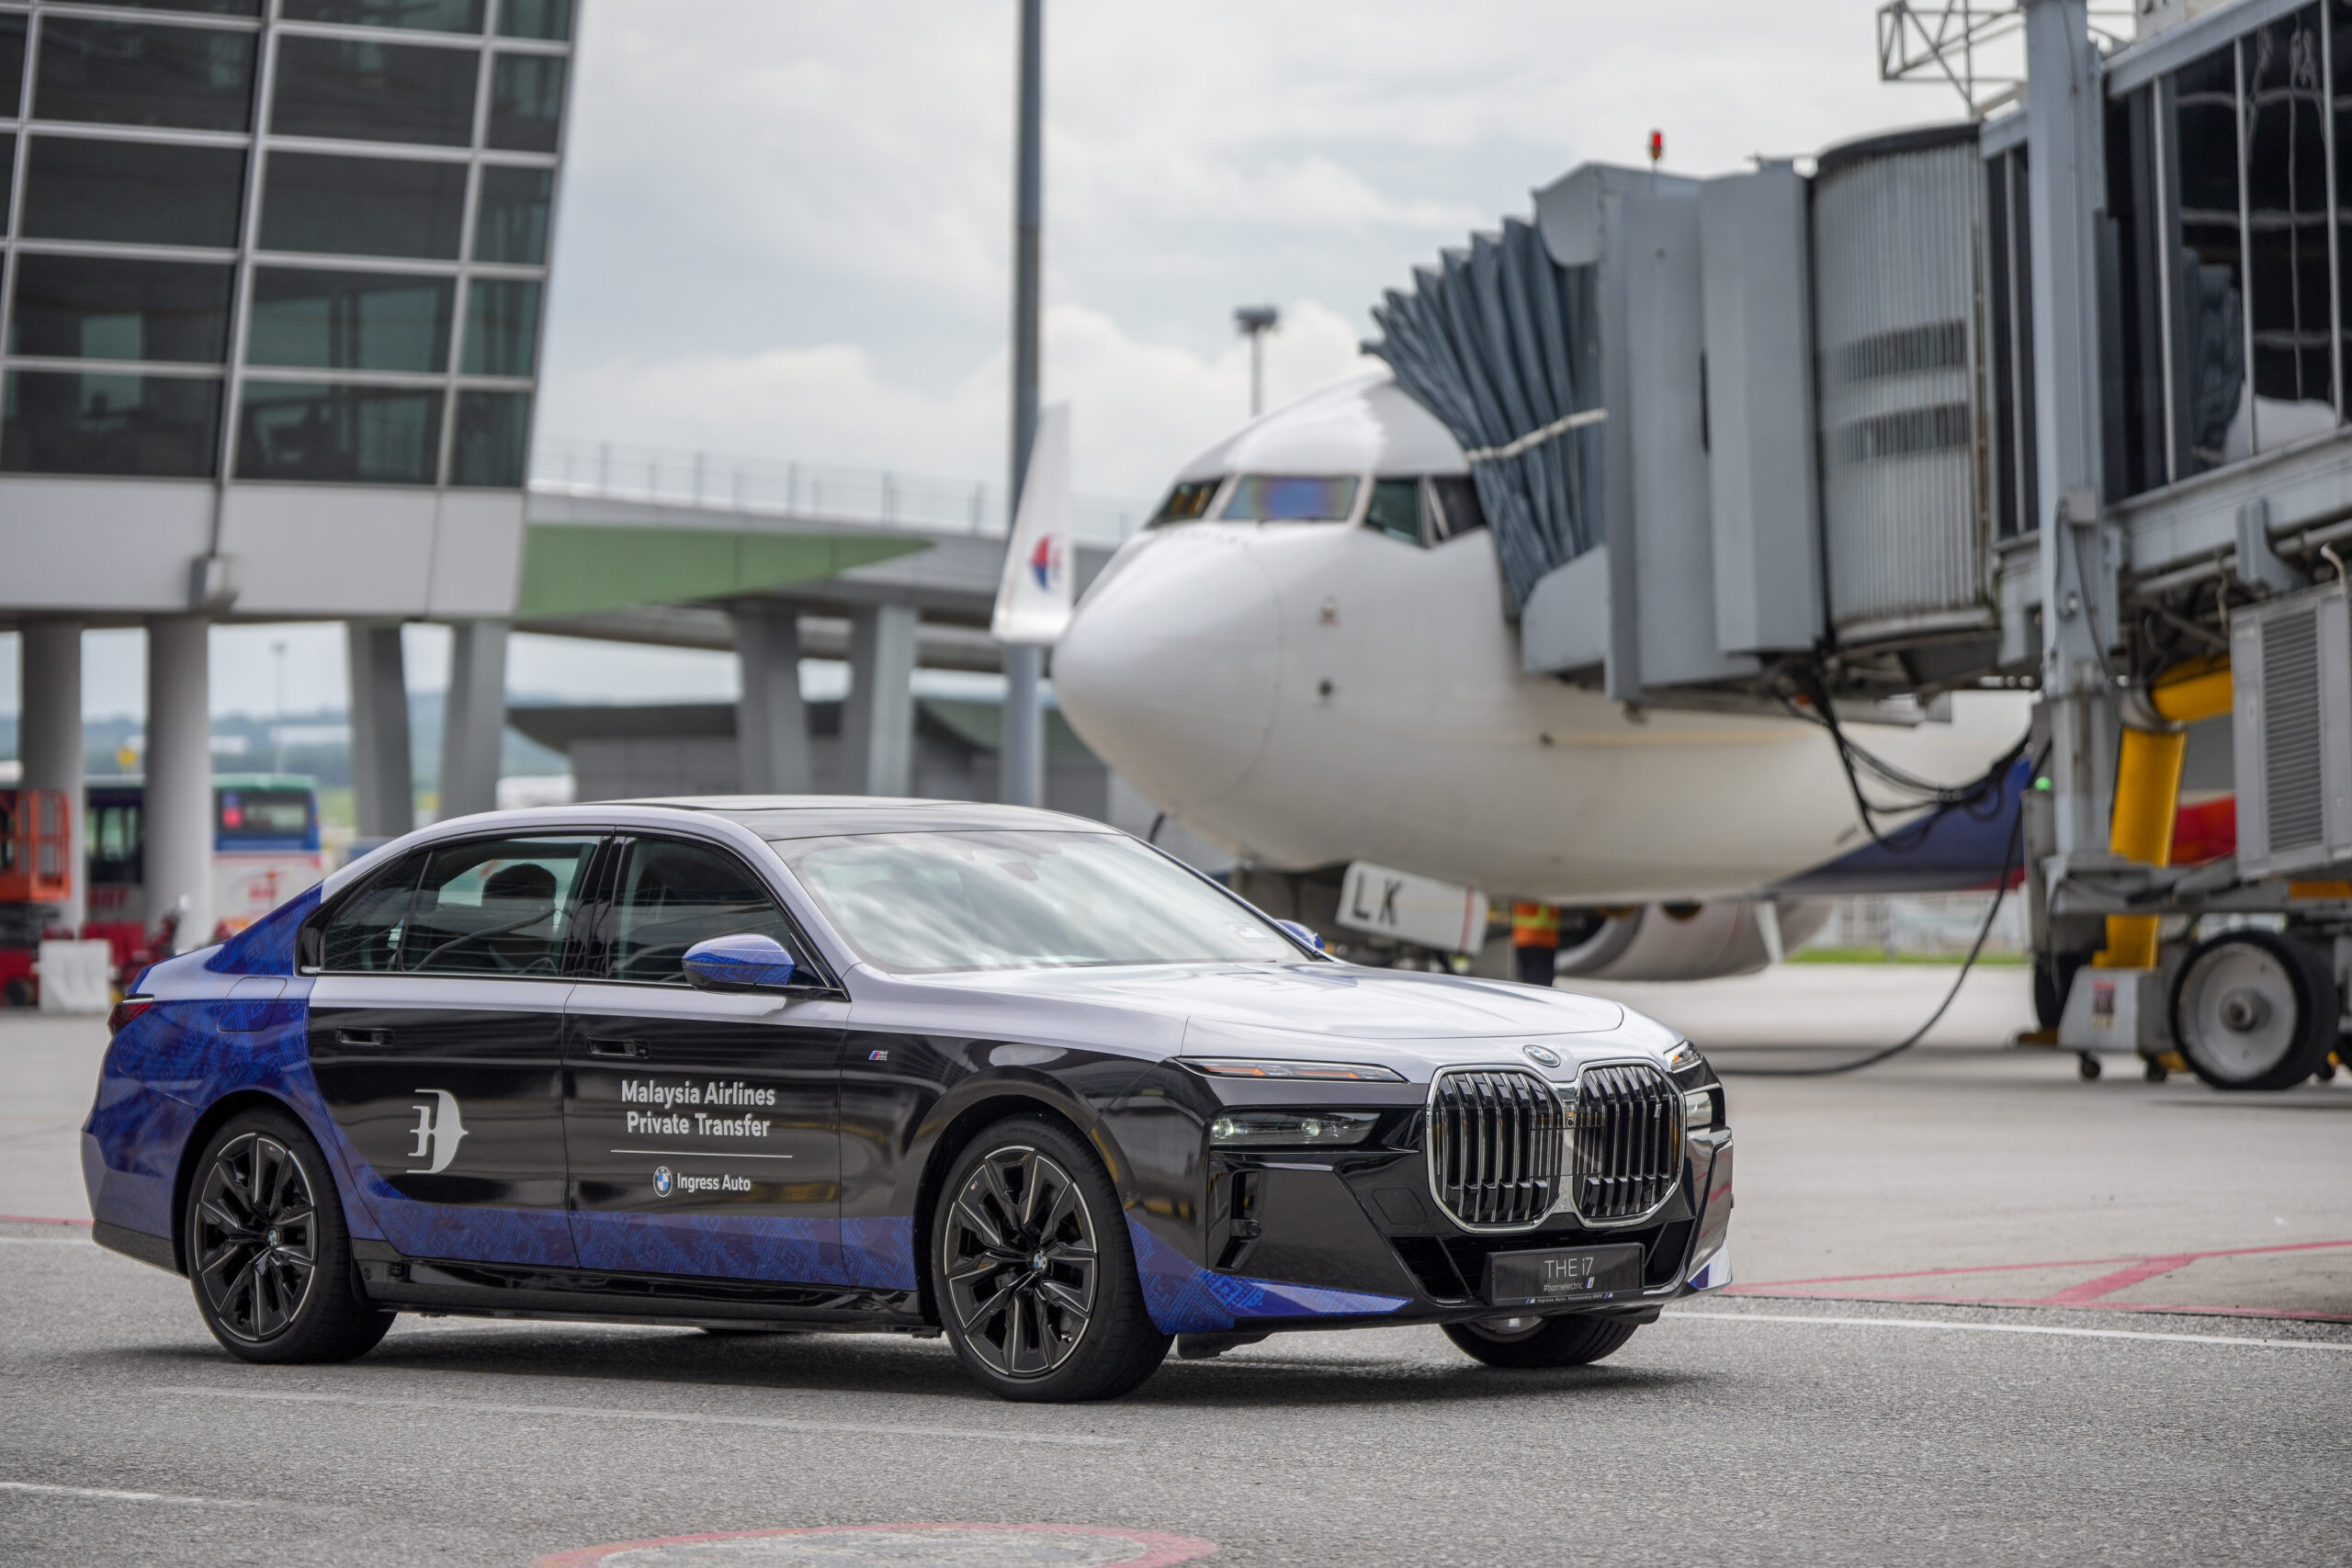 03. Malaysia airlines to introduce exclusive luxury private terminal transfer service with bmw group malaysia and ingress auto beginning 1 january 2024